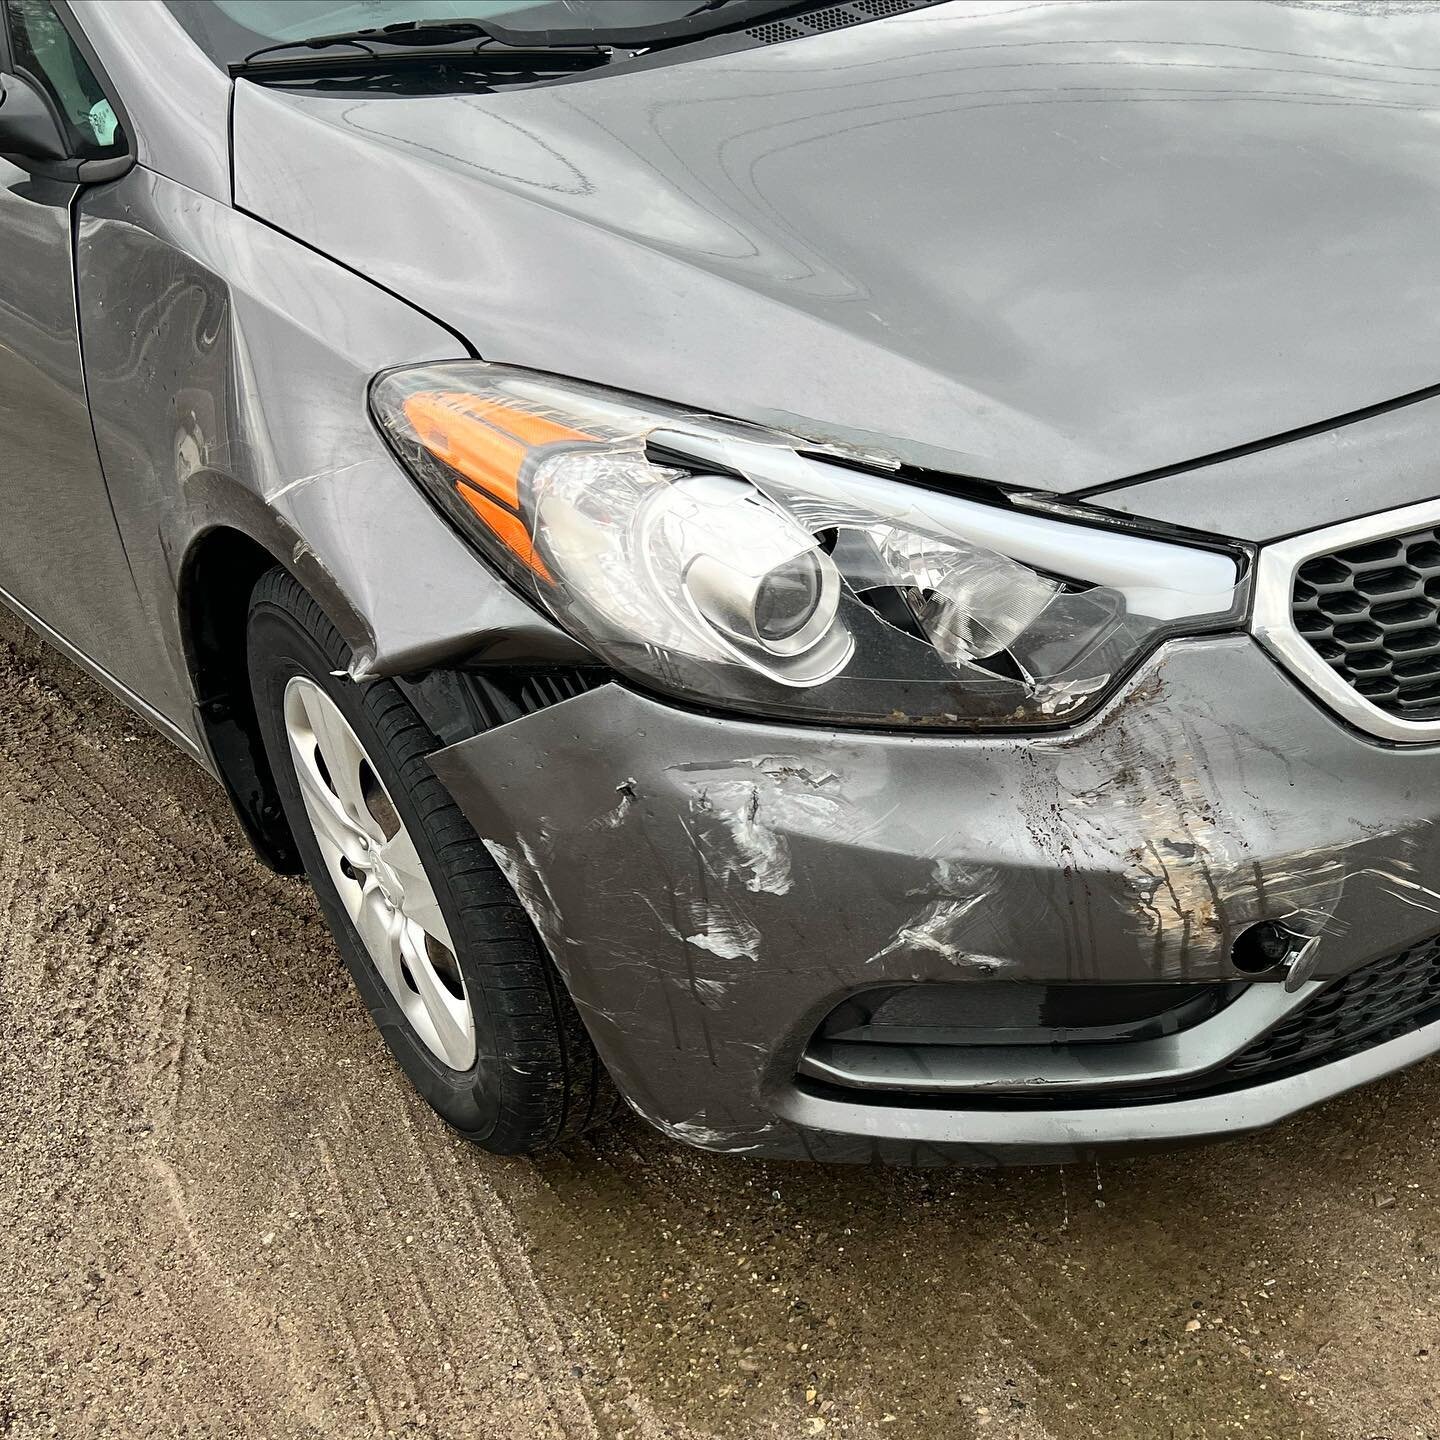 Welp, life on hold again. In February my son and I were driving home after a dentist appointment and somebody decided to do an illegal u-turn in front of me and driving into them totalled my car. It&rsquo;s going to take me some time to get another c